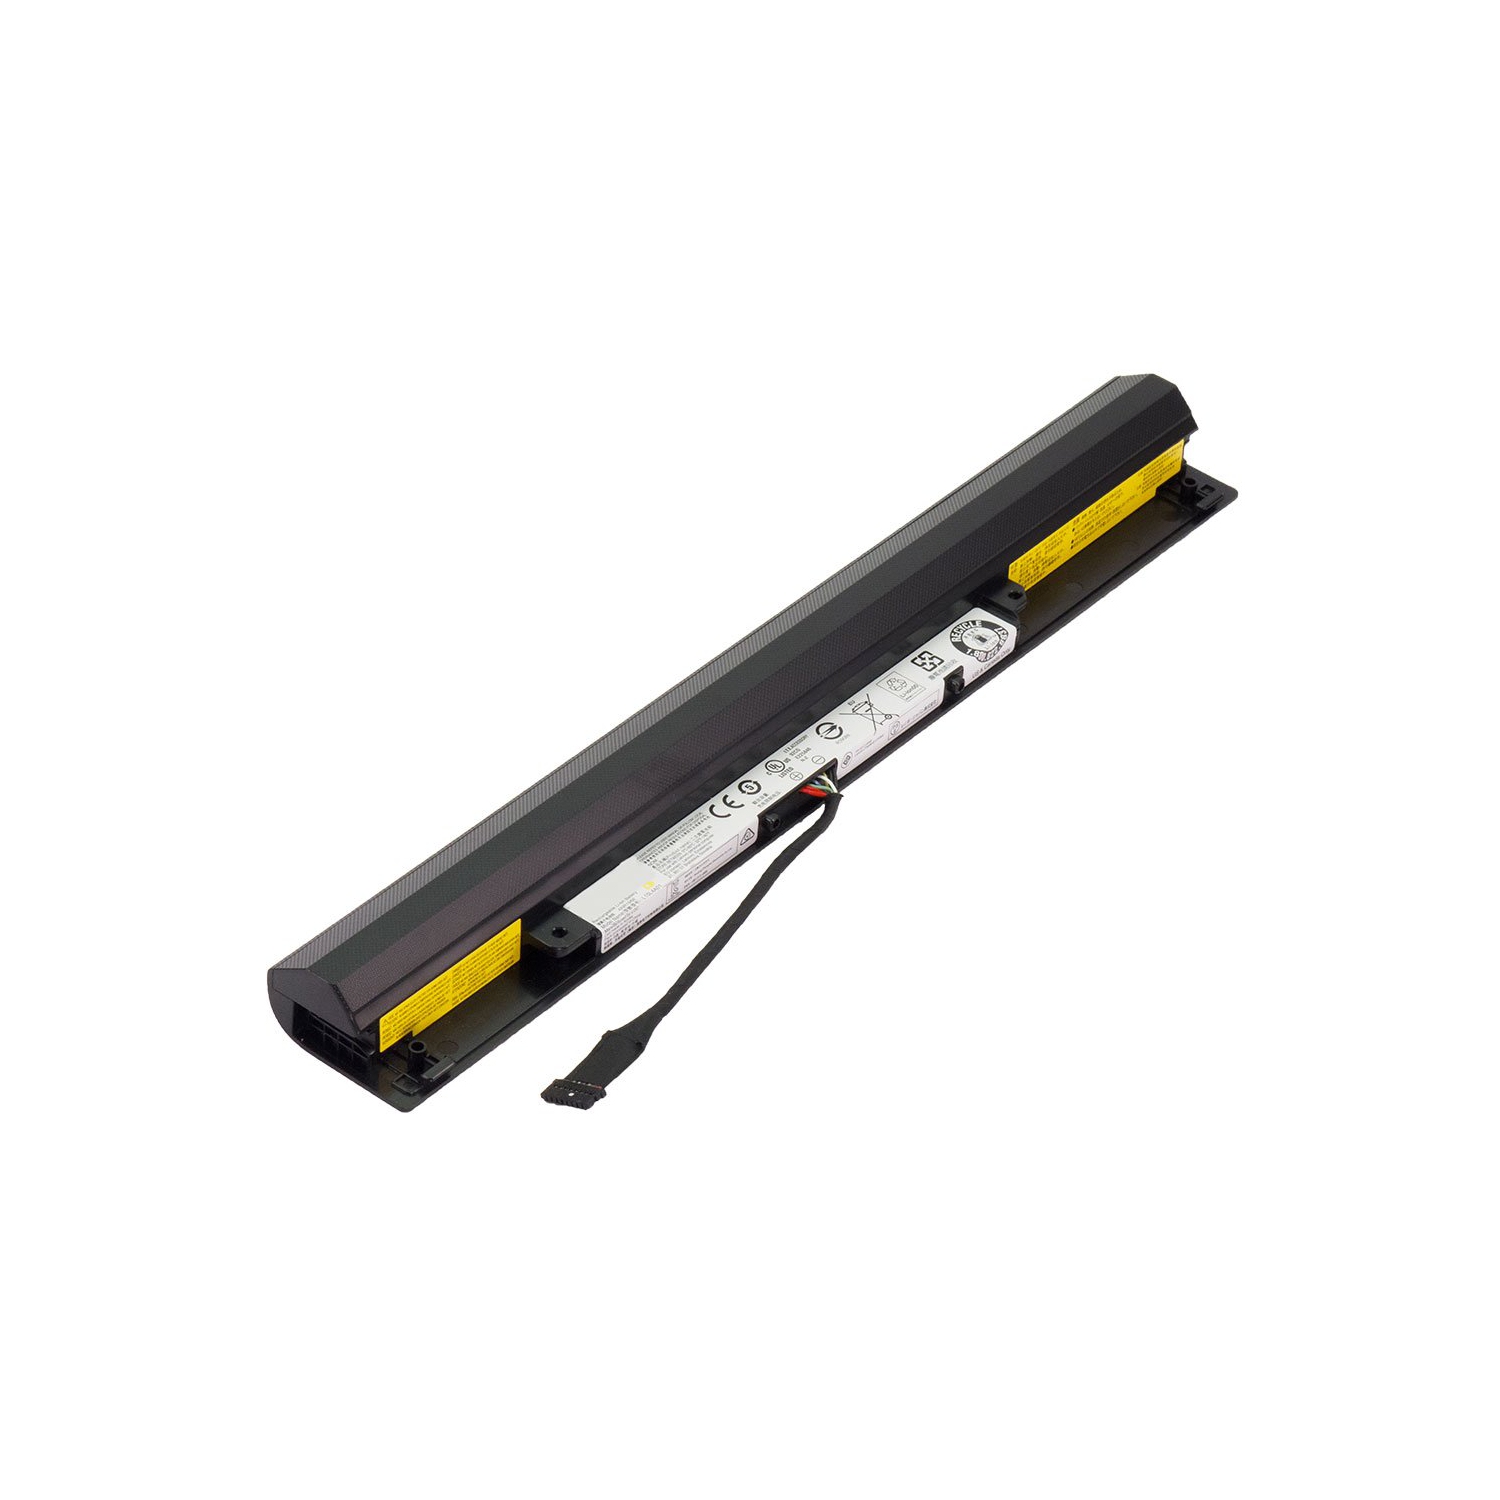 Laptop Battery Replacement for Lenovo IdeaPad 100-15IBD 80MJ00CJGE, 41NR19/65, L15L4A01